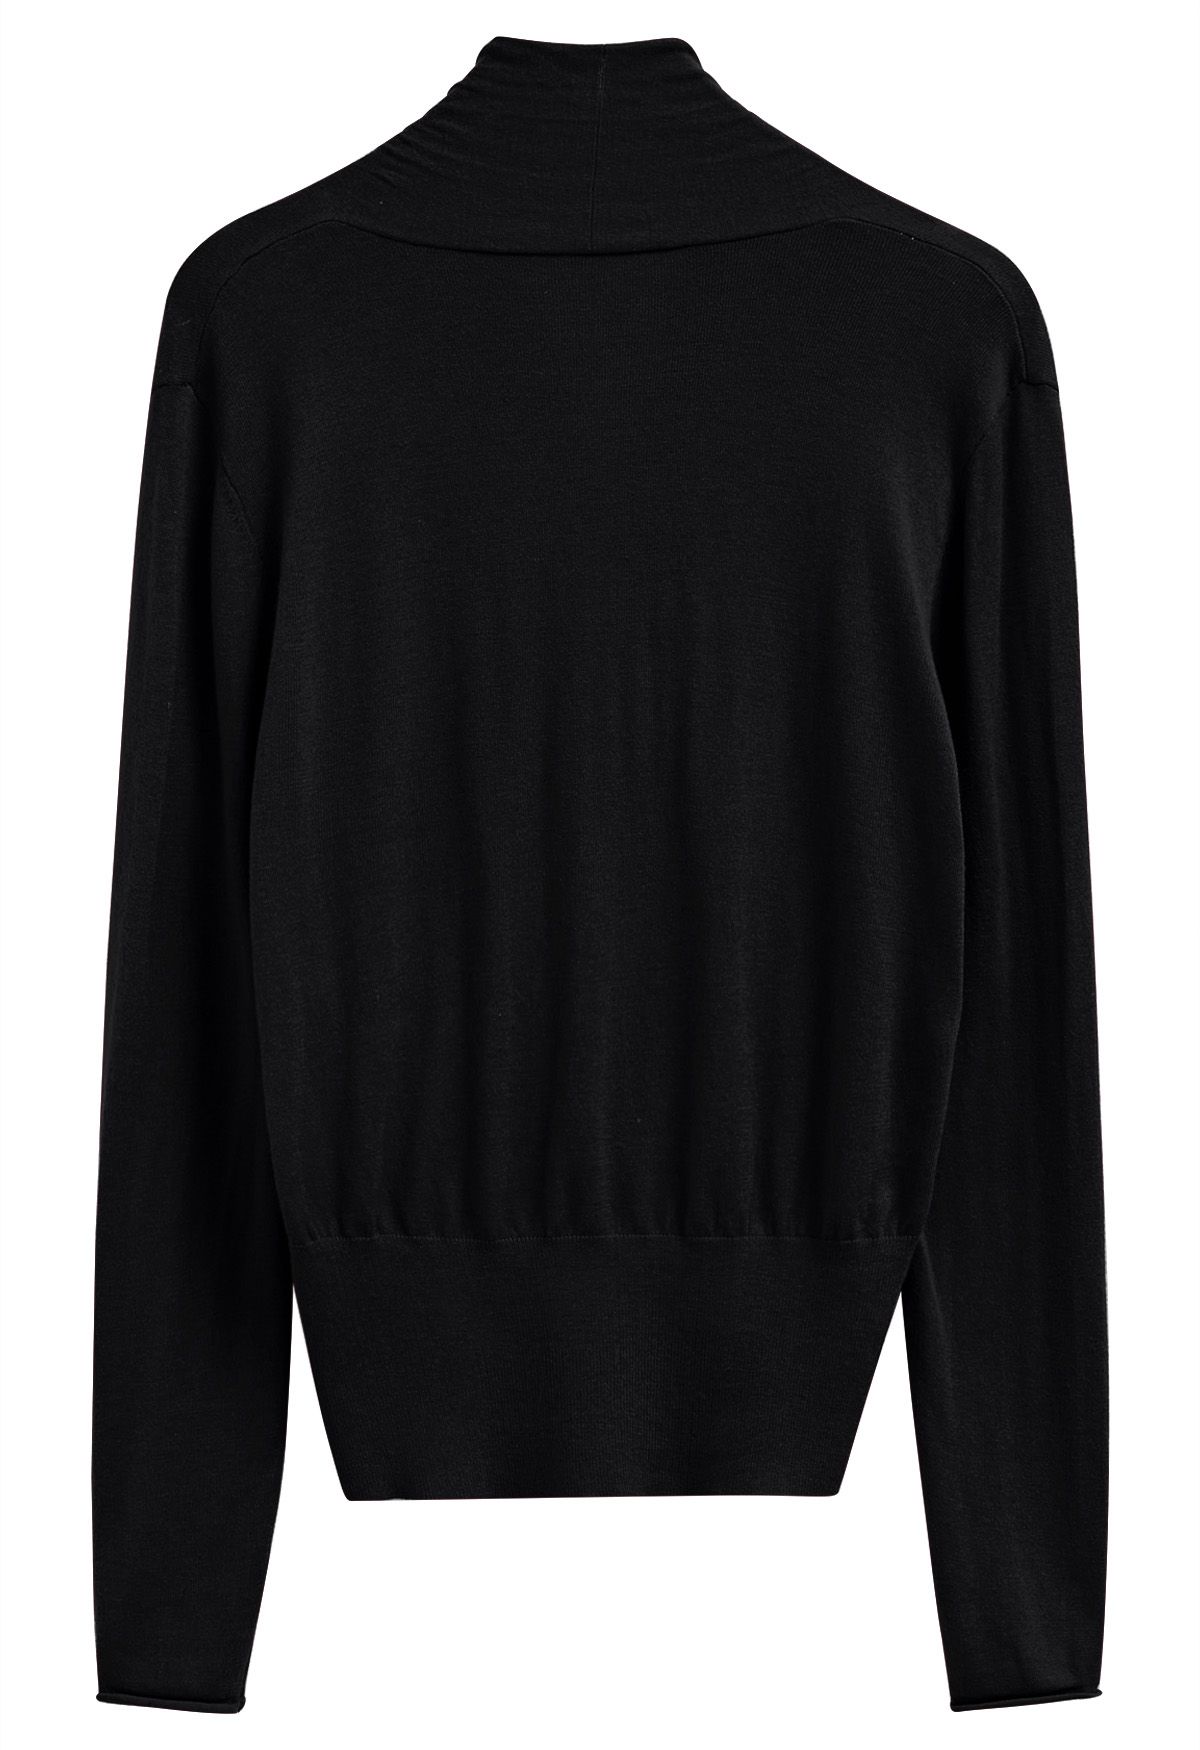 Effortless Elegance Wrap Knit Top in Black - Retro, Indie and Unique ...